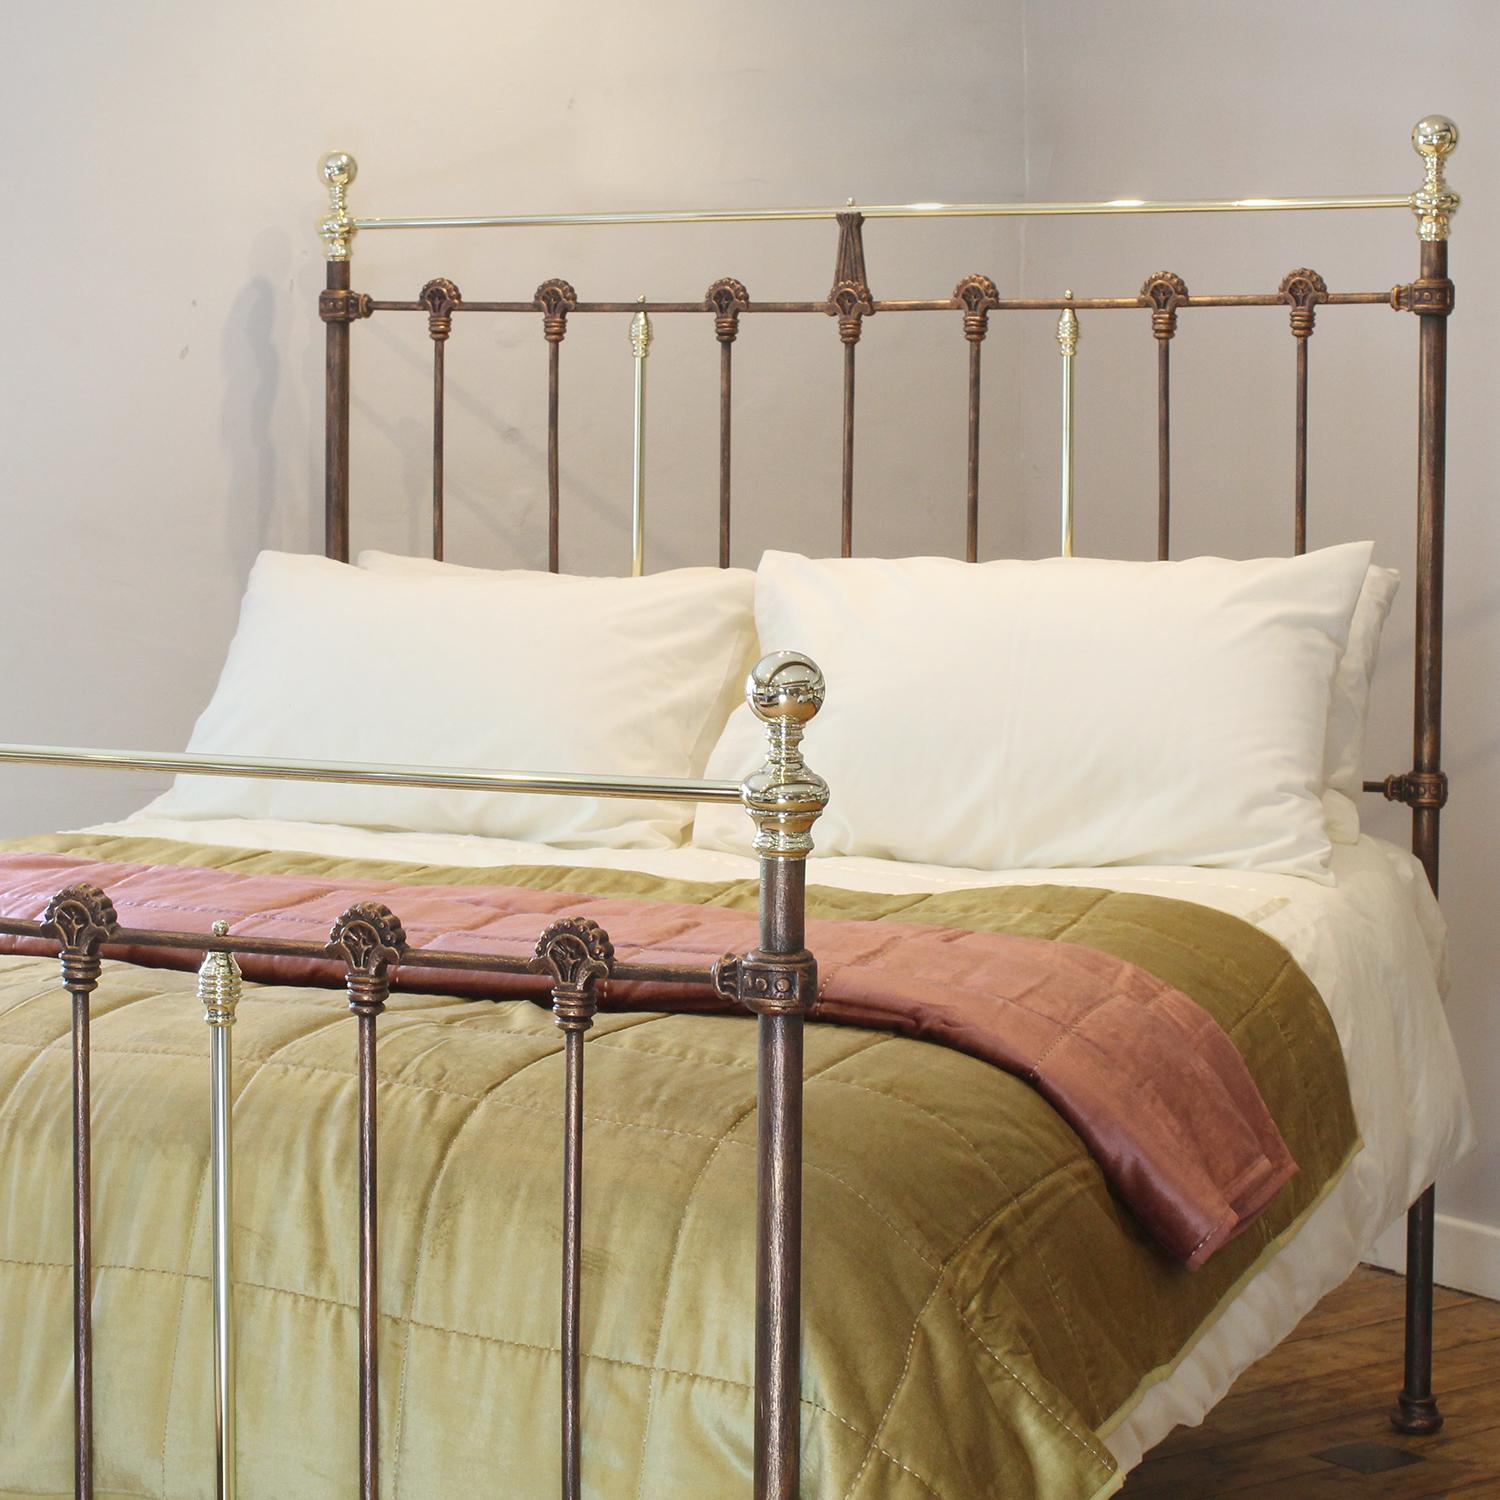 Cast Brass and Iron Antique Bed in Bronze, MK257